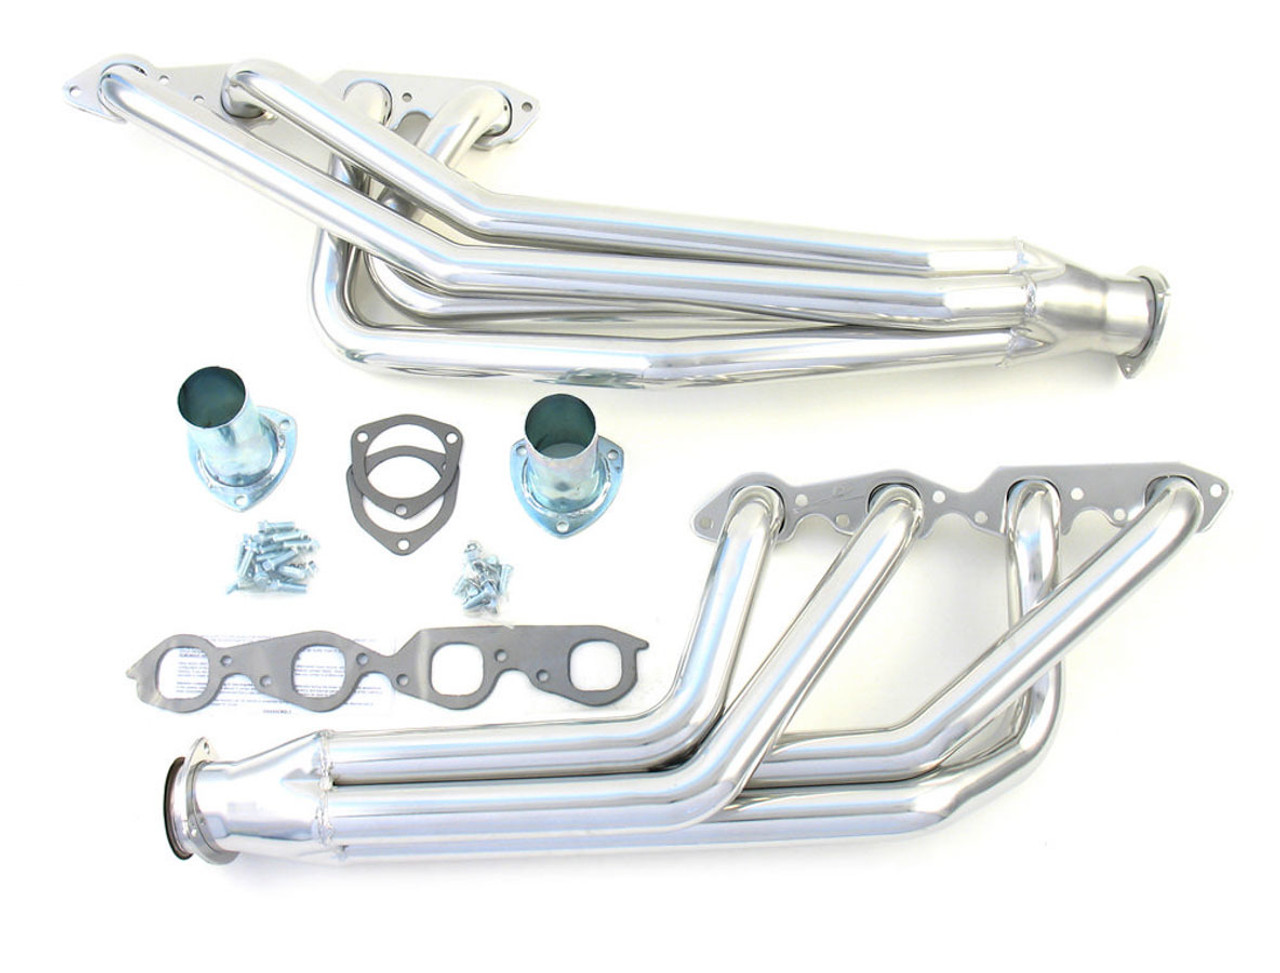 Coated Headers - 55-57 Chevy